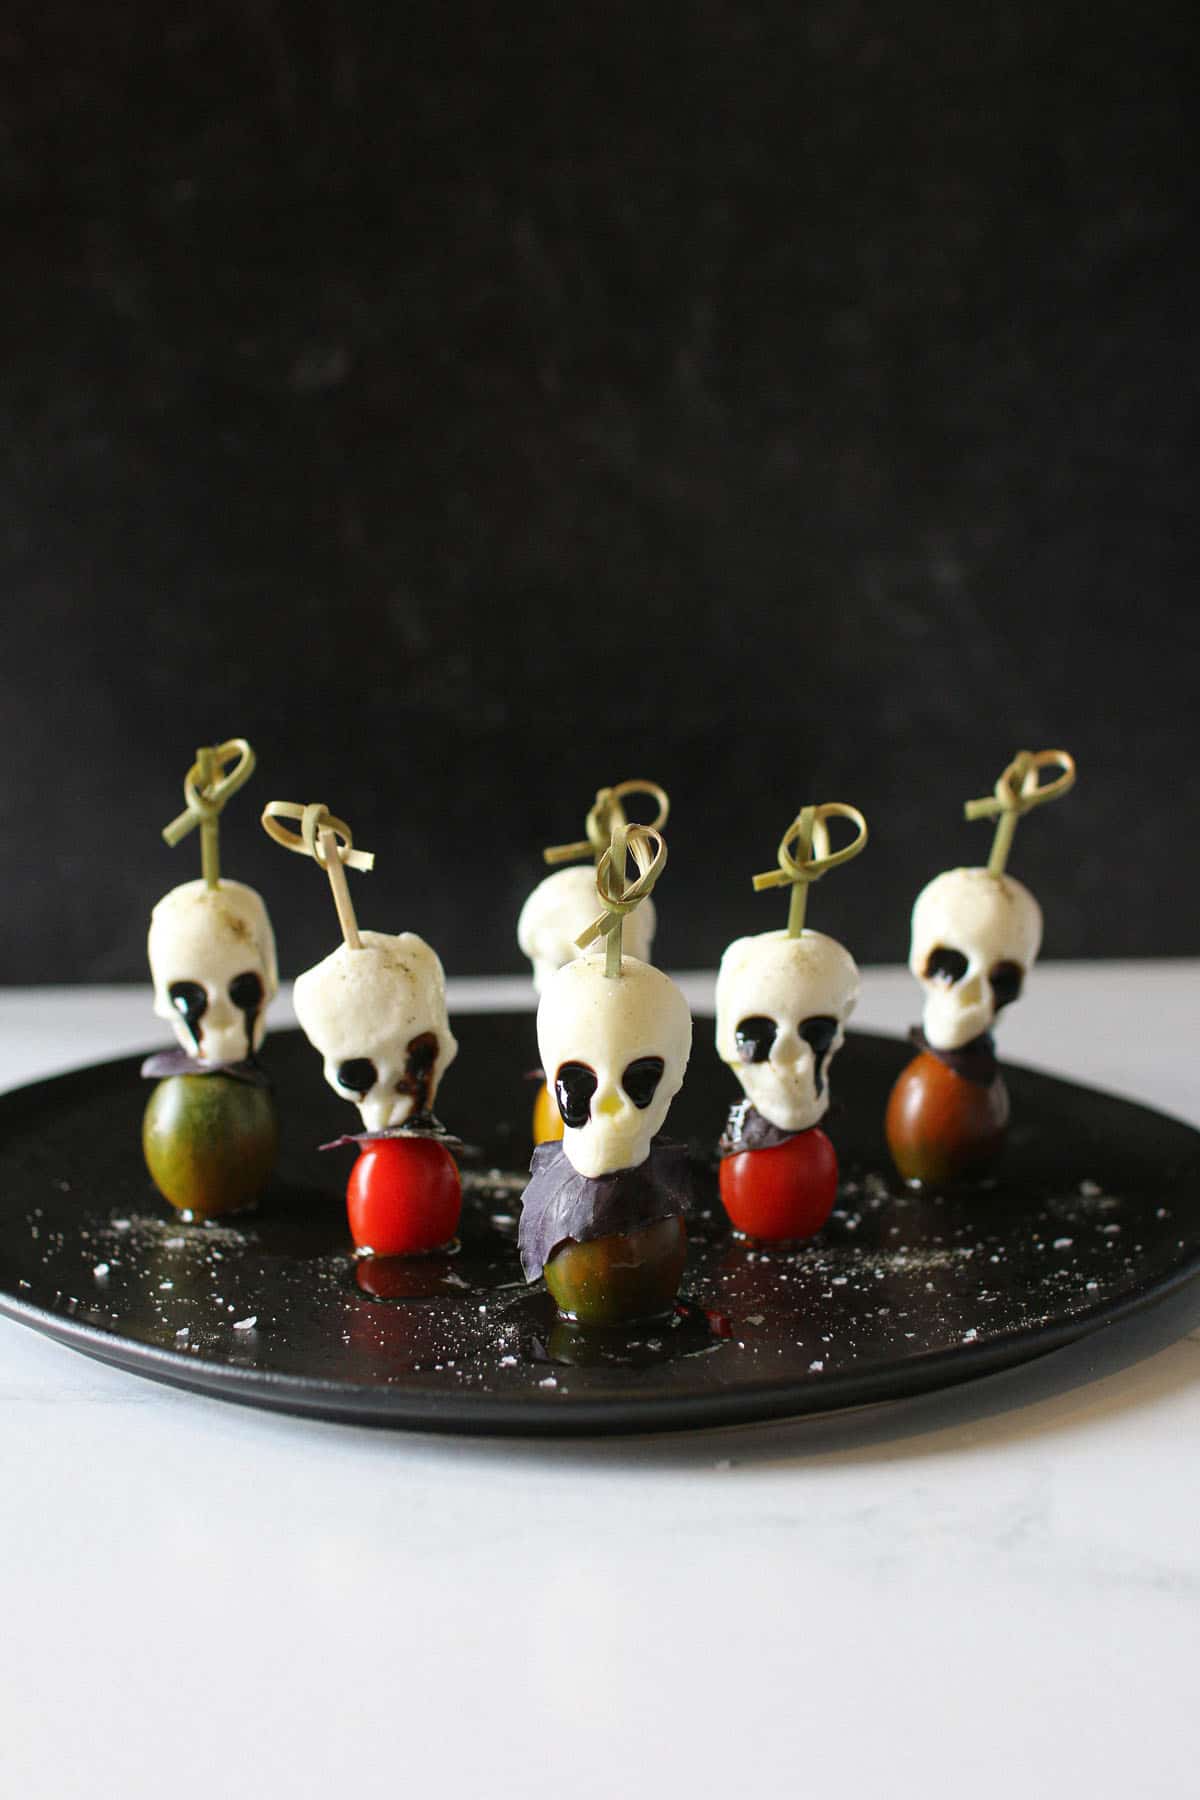 Halloween Caprese skewers with mozzarella skulls, tomatoes, and purple basil on a black plate with black background.